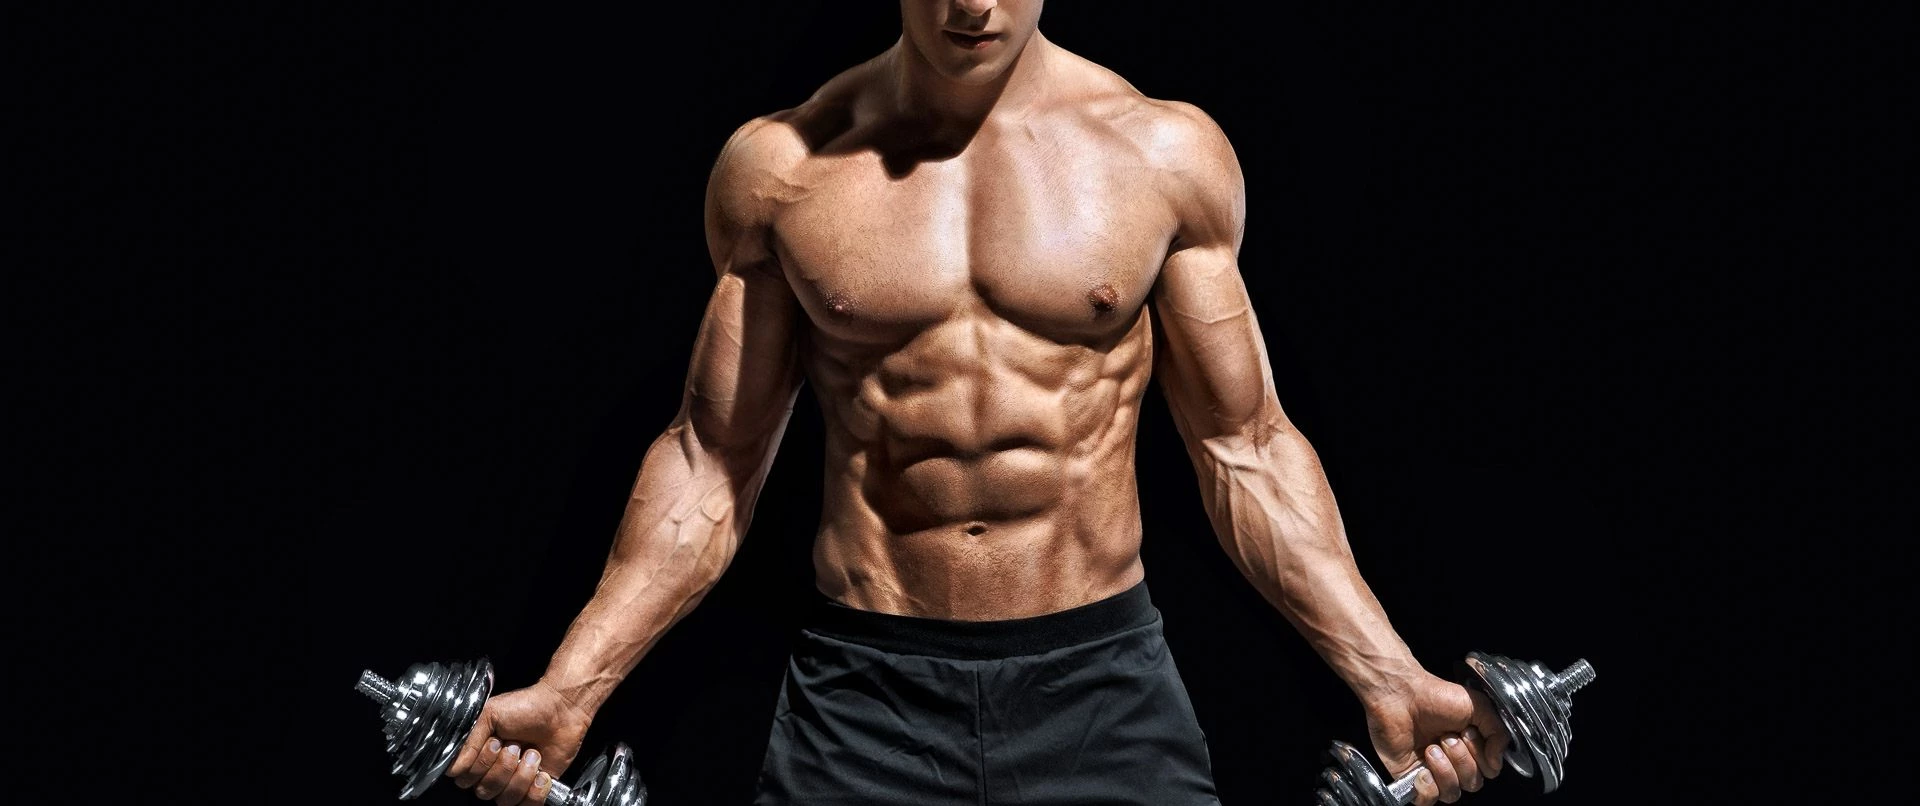 The effect of anabolic steroids on the body